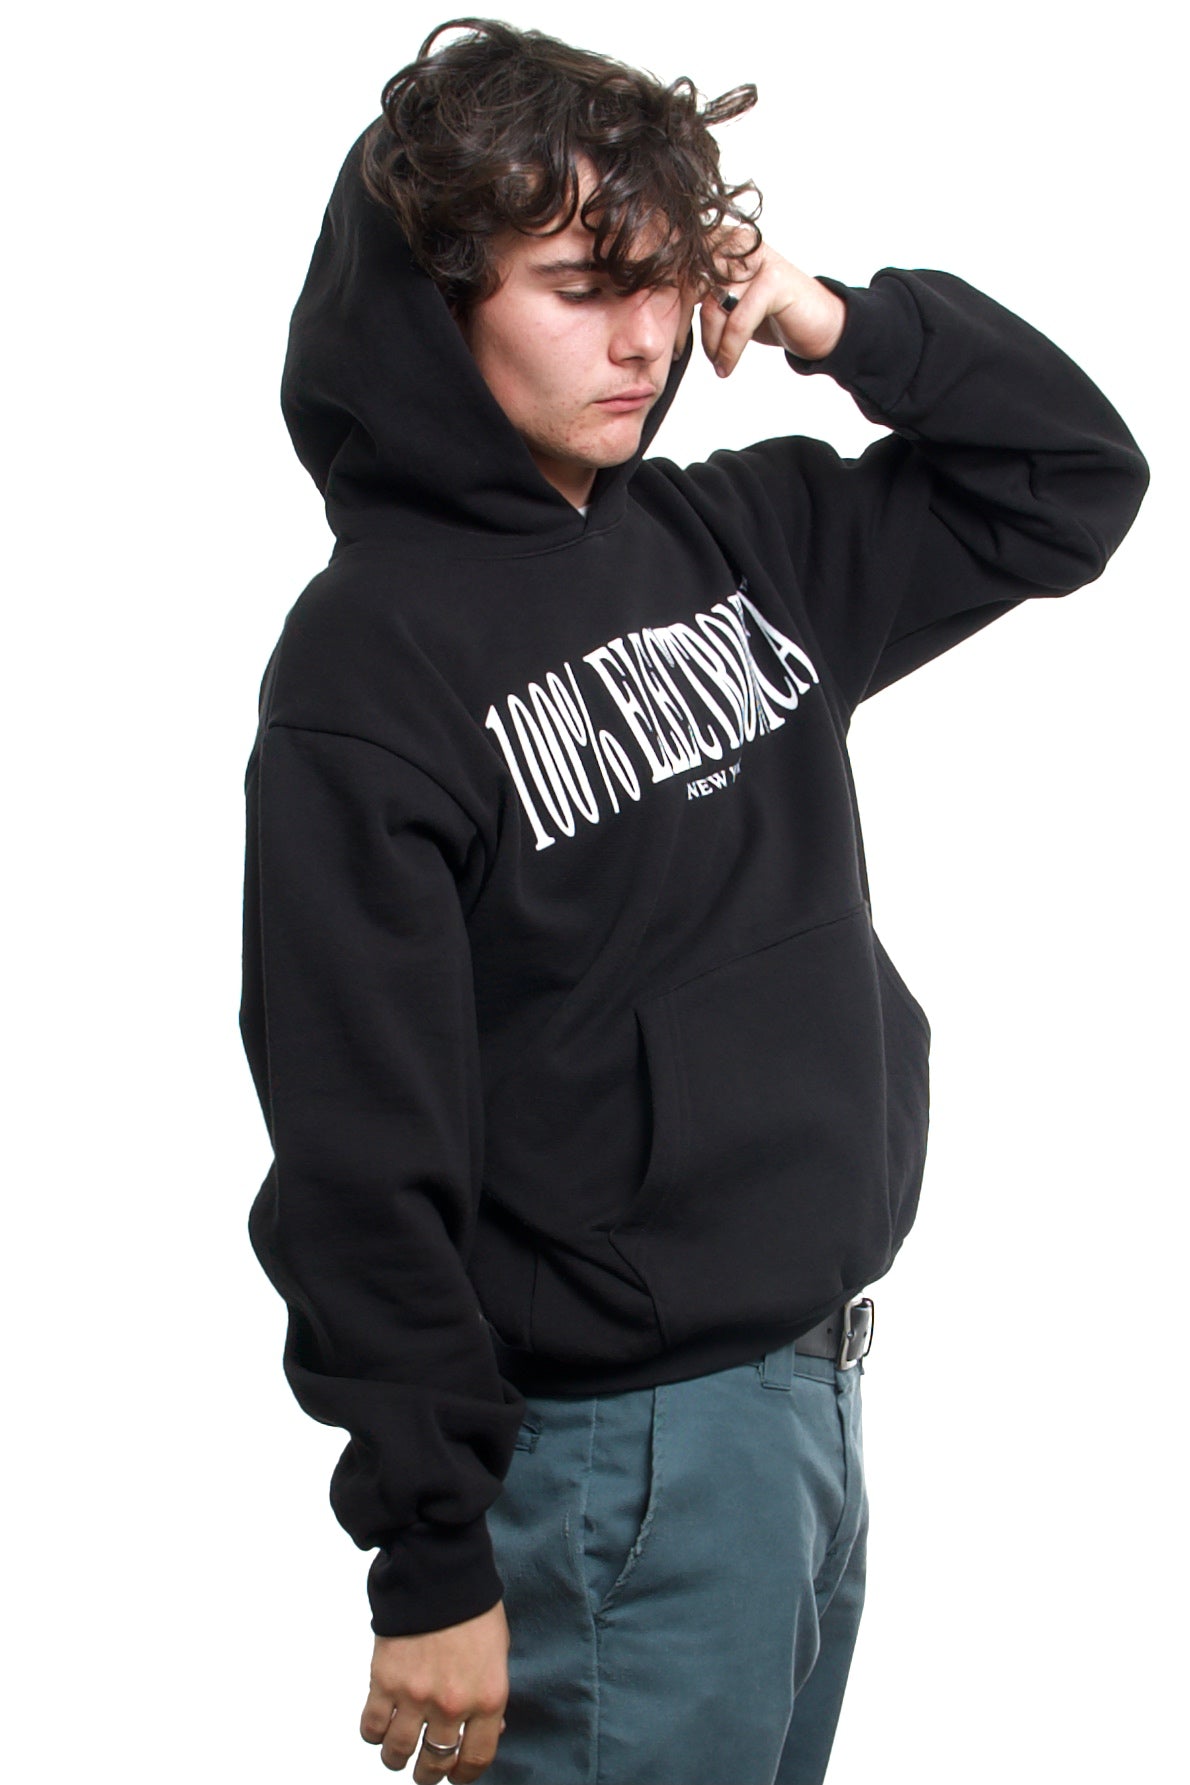 100% Electronica - 100% Electronica Hoodie - Black - 100% Electronica Official Store (Photo 4)